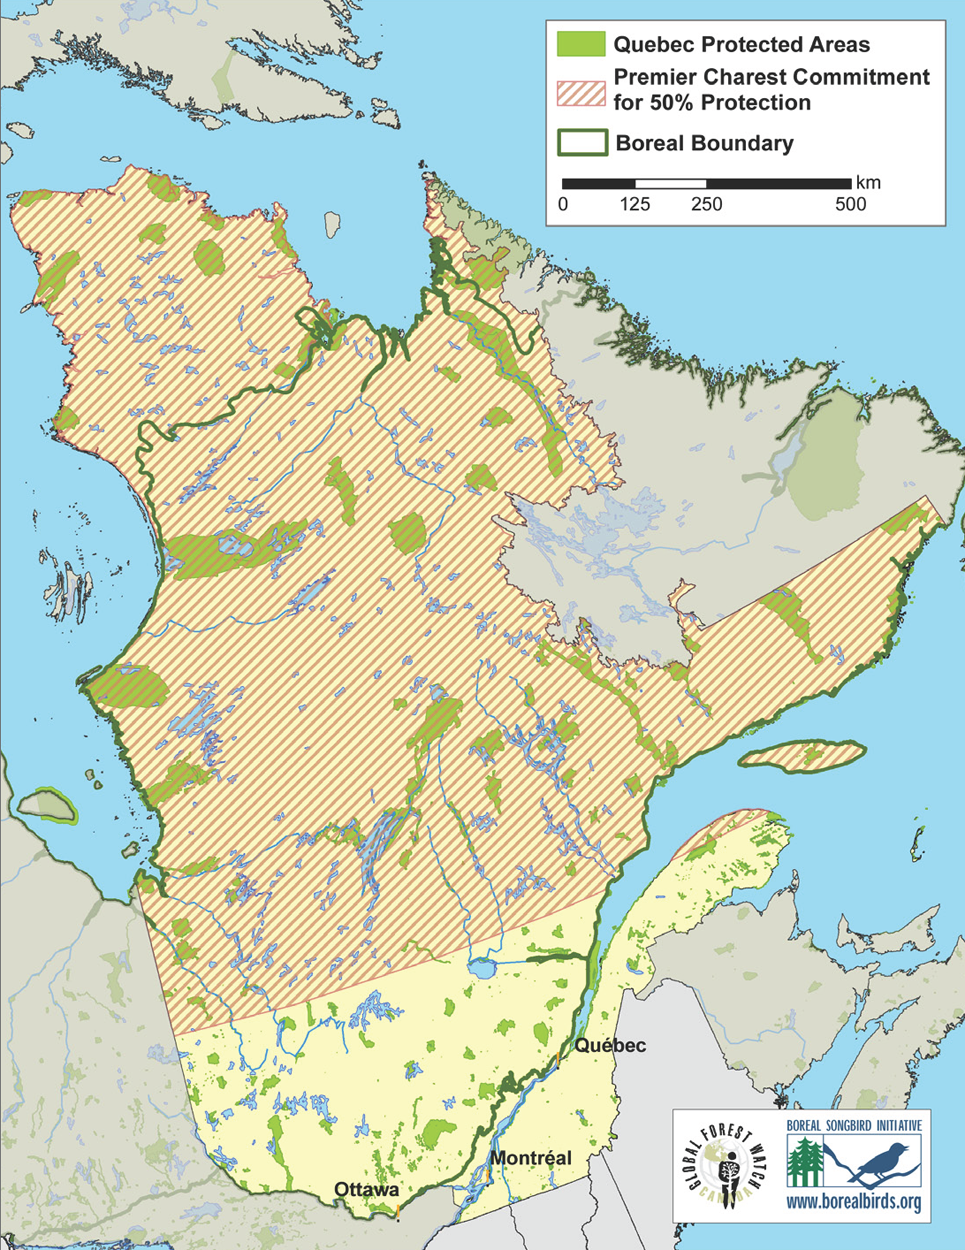 Quebec Protexted Areas